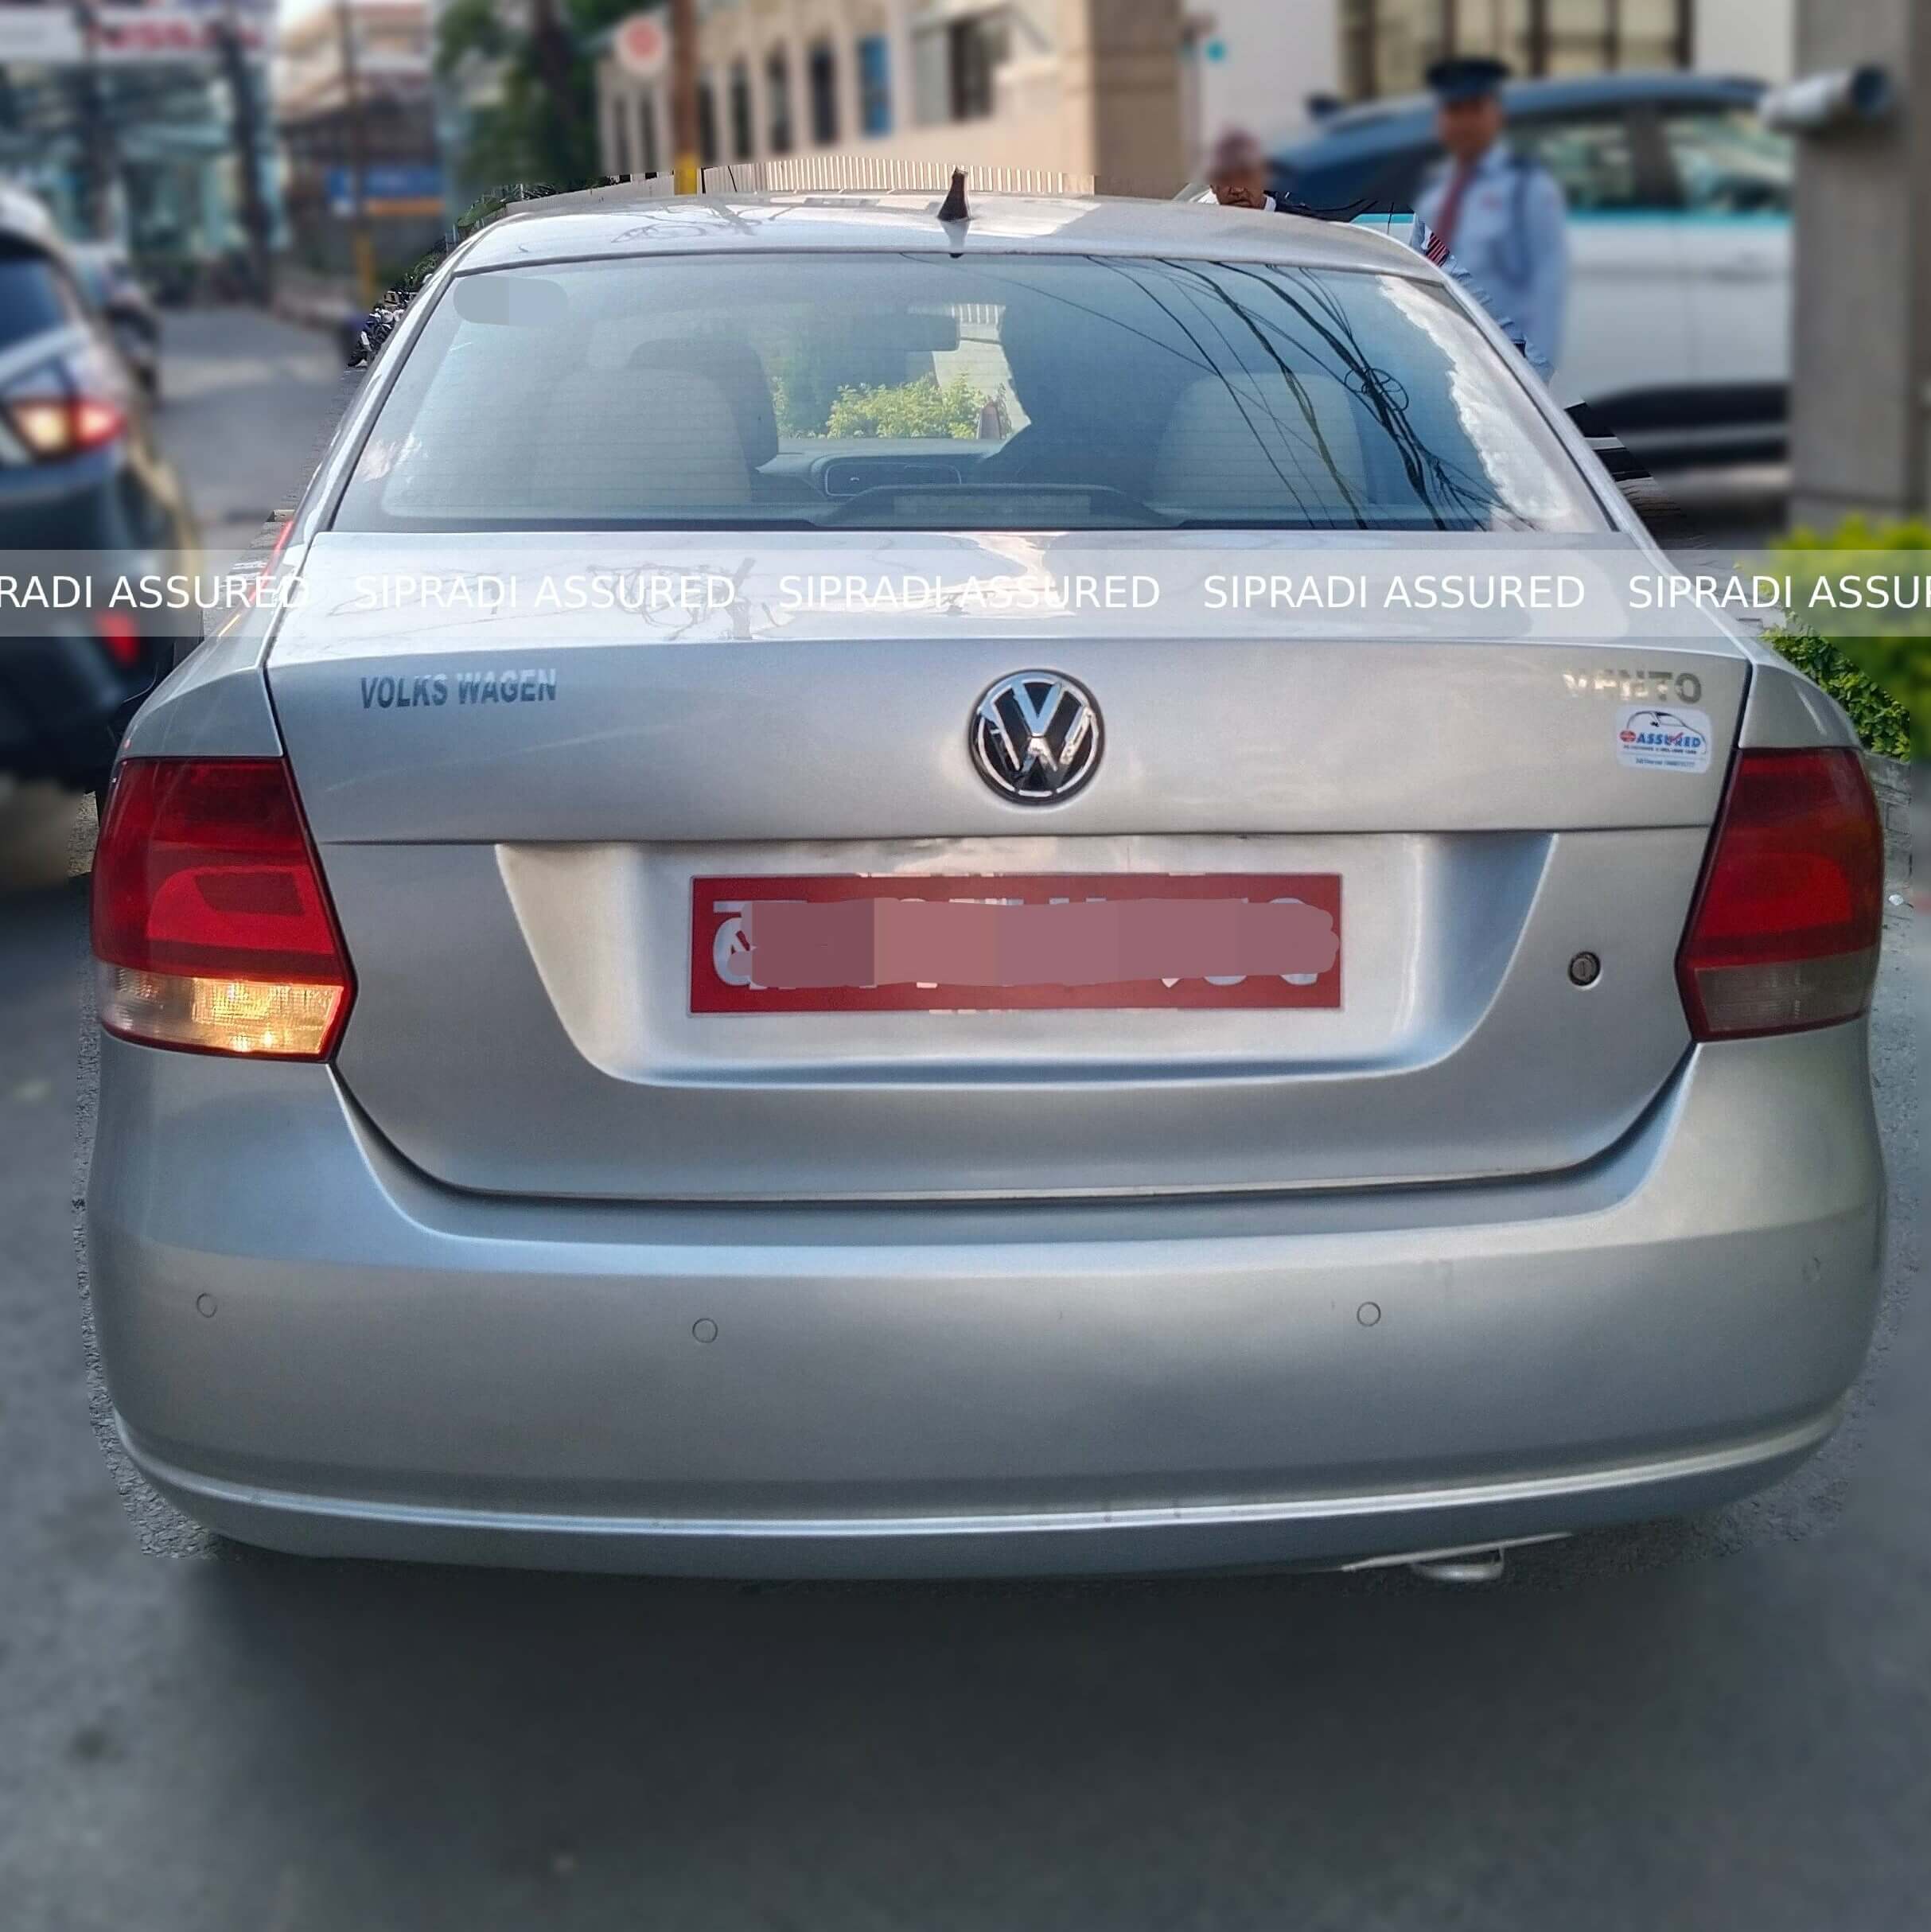 Second hand TATA Indica in Nepal
 -Best buy second hand car
-2nd hand car dealers in Kathmandu
Exchange second hand car in Nepal
Best second hand car in Nepal
Best price second hand car near me
